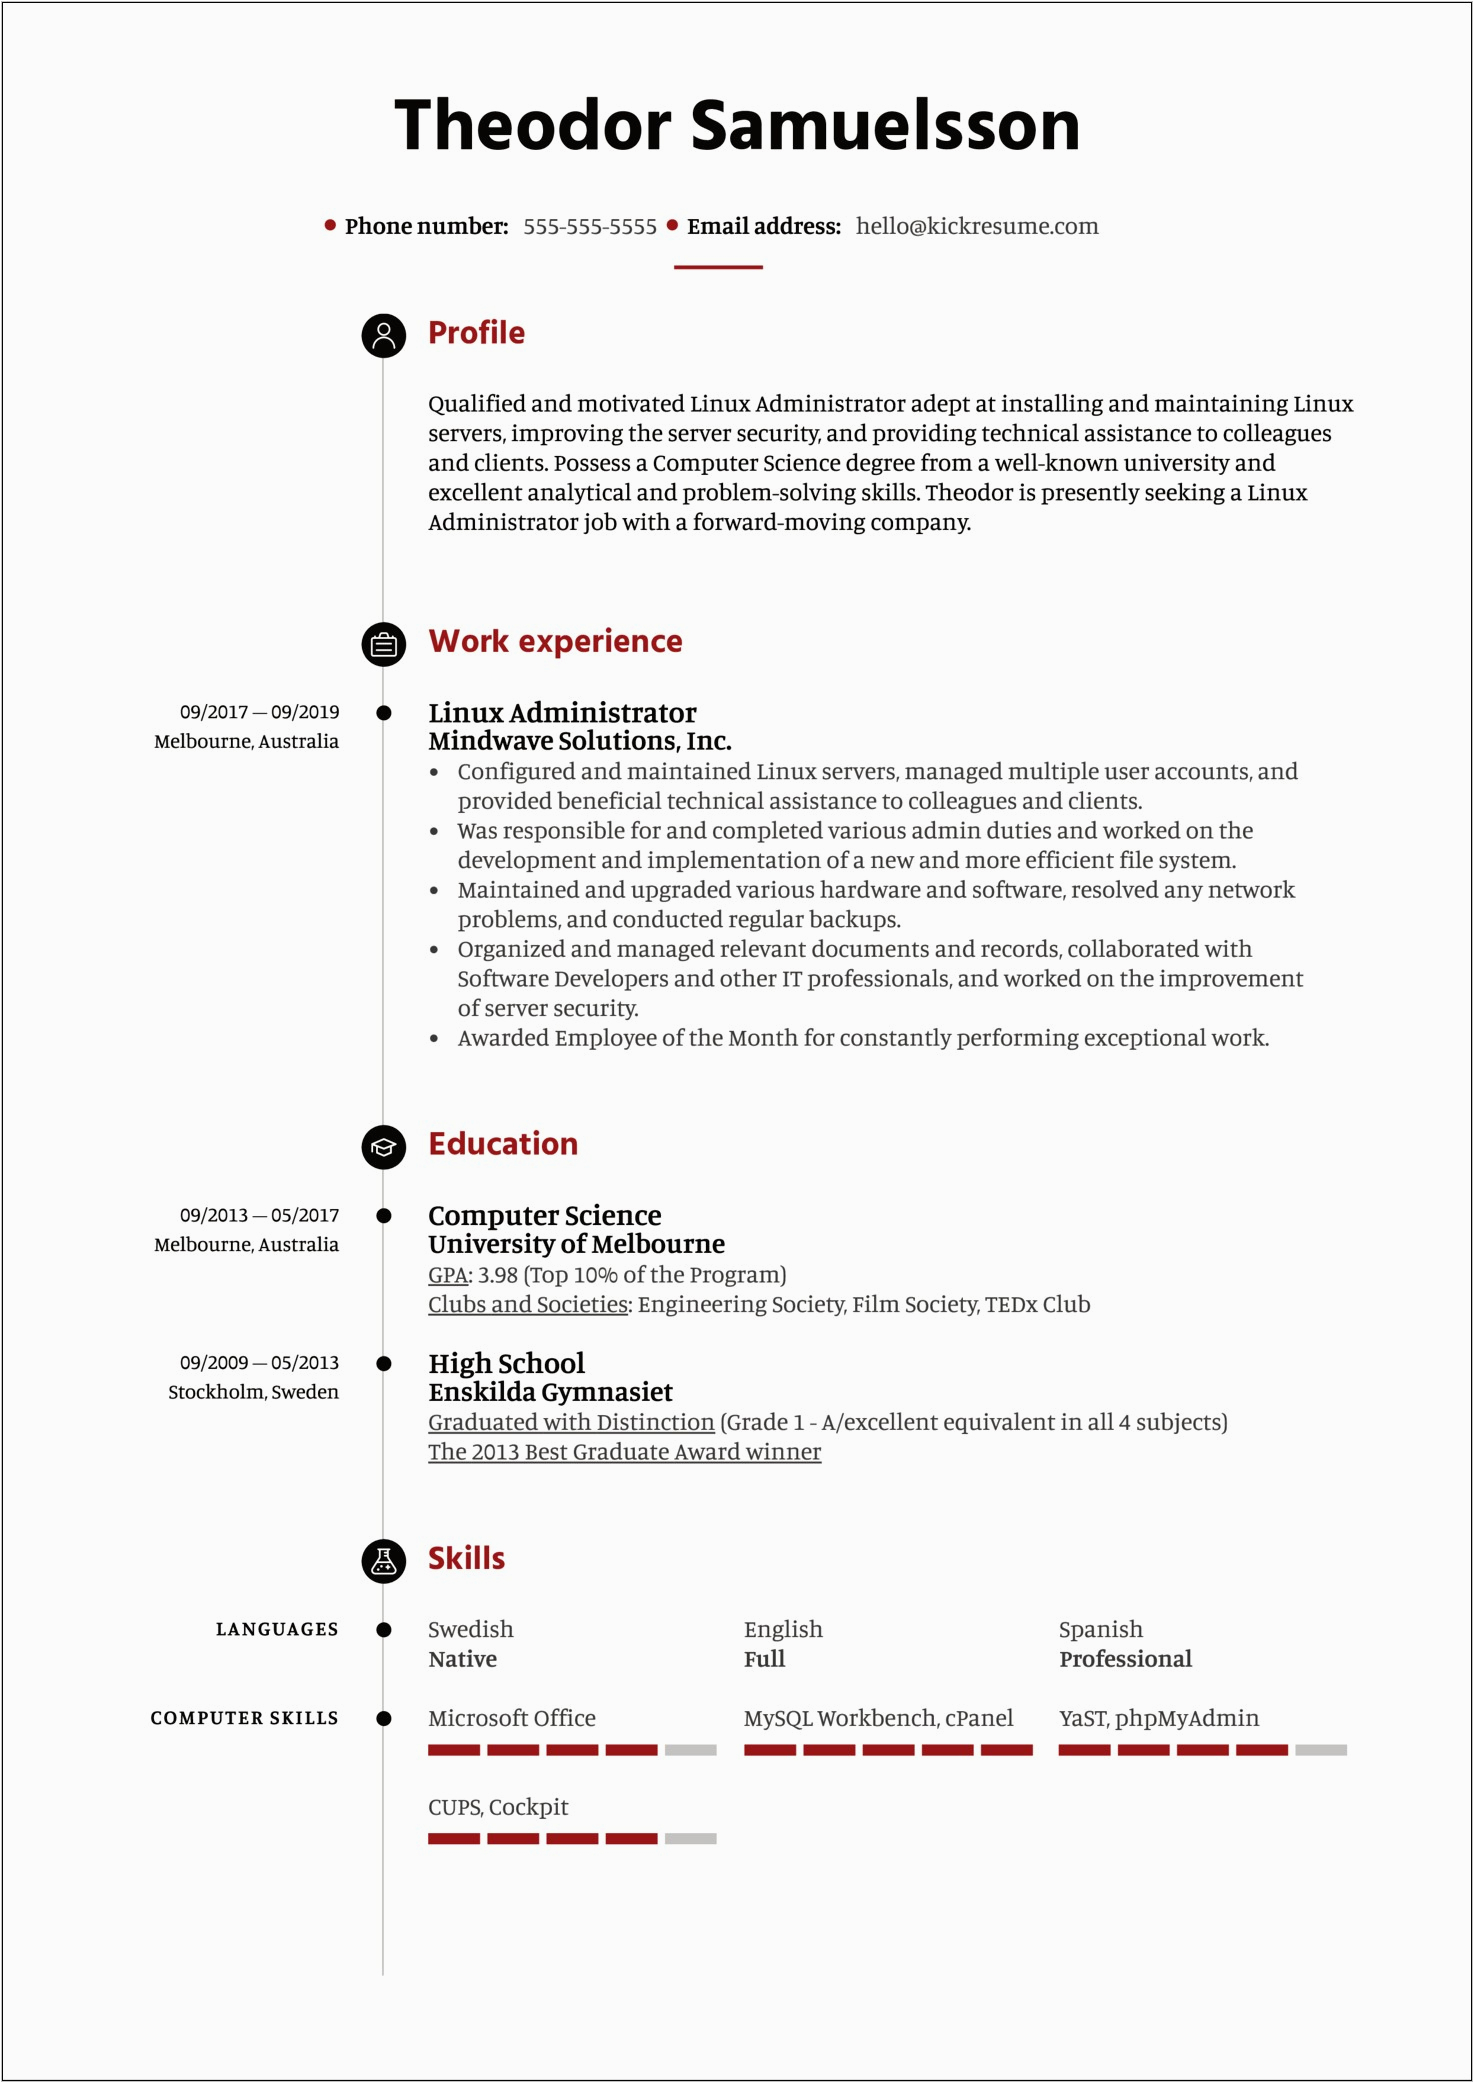 Sample Resume for Entry Level System Administrator Entry Level System Administrator Resume Sample Resume Example Gallery